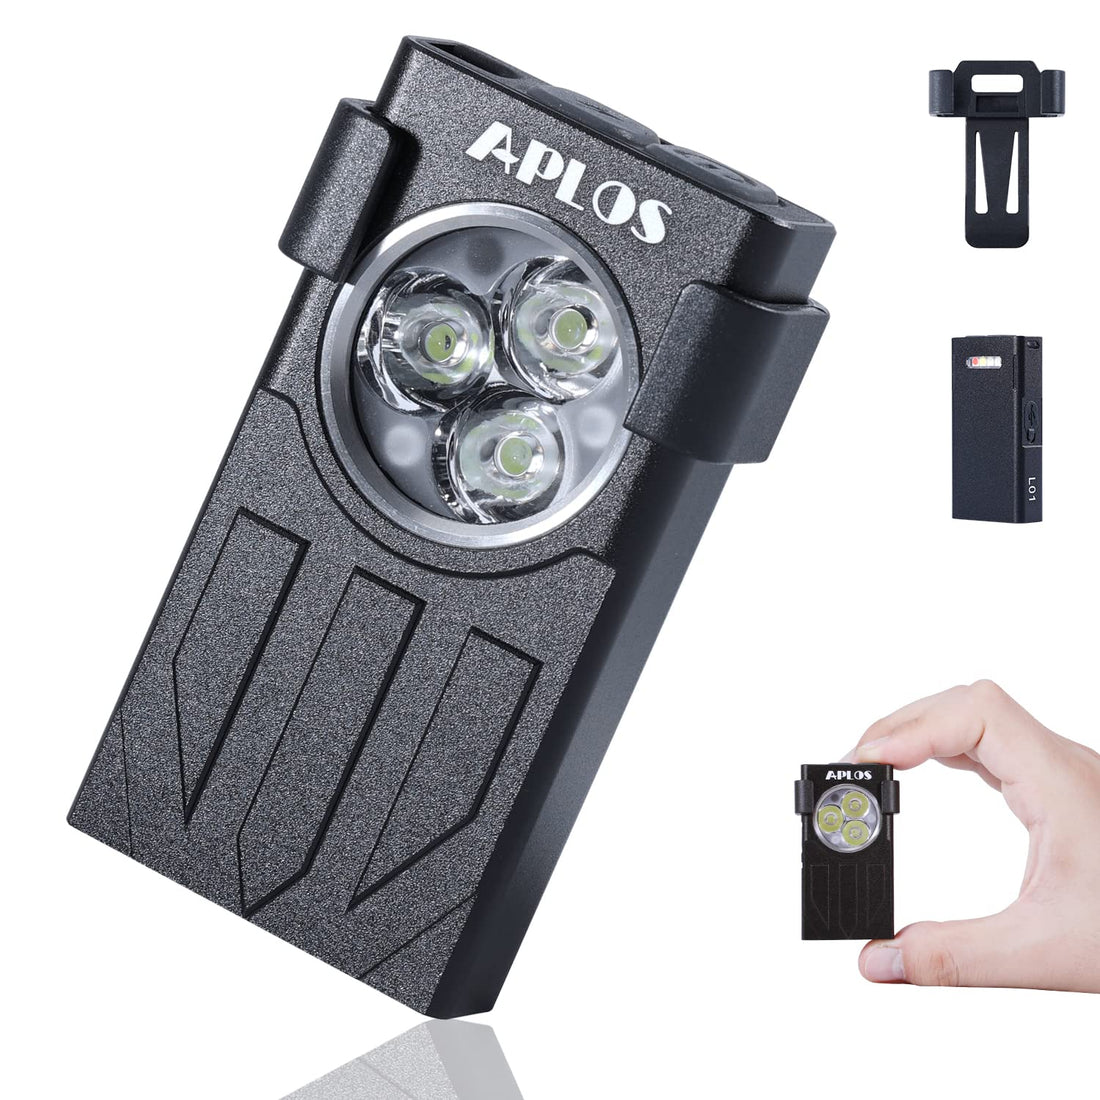 APLOS L01 1100 Lumens Rechargeable Mini EDC Flashlight, Magnetic Base & Clip, Bright Pocket Flashlight for Outdoor, Emergencies, Powered by Built-in Battery, Type-C Charging (Black)